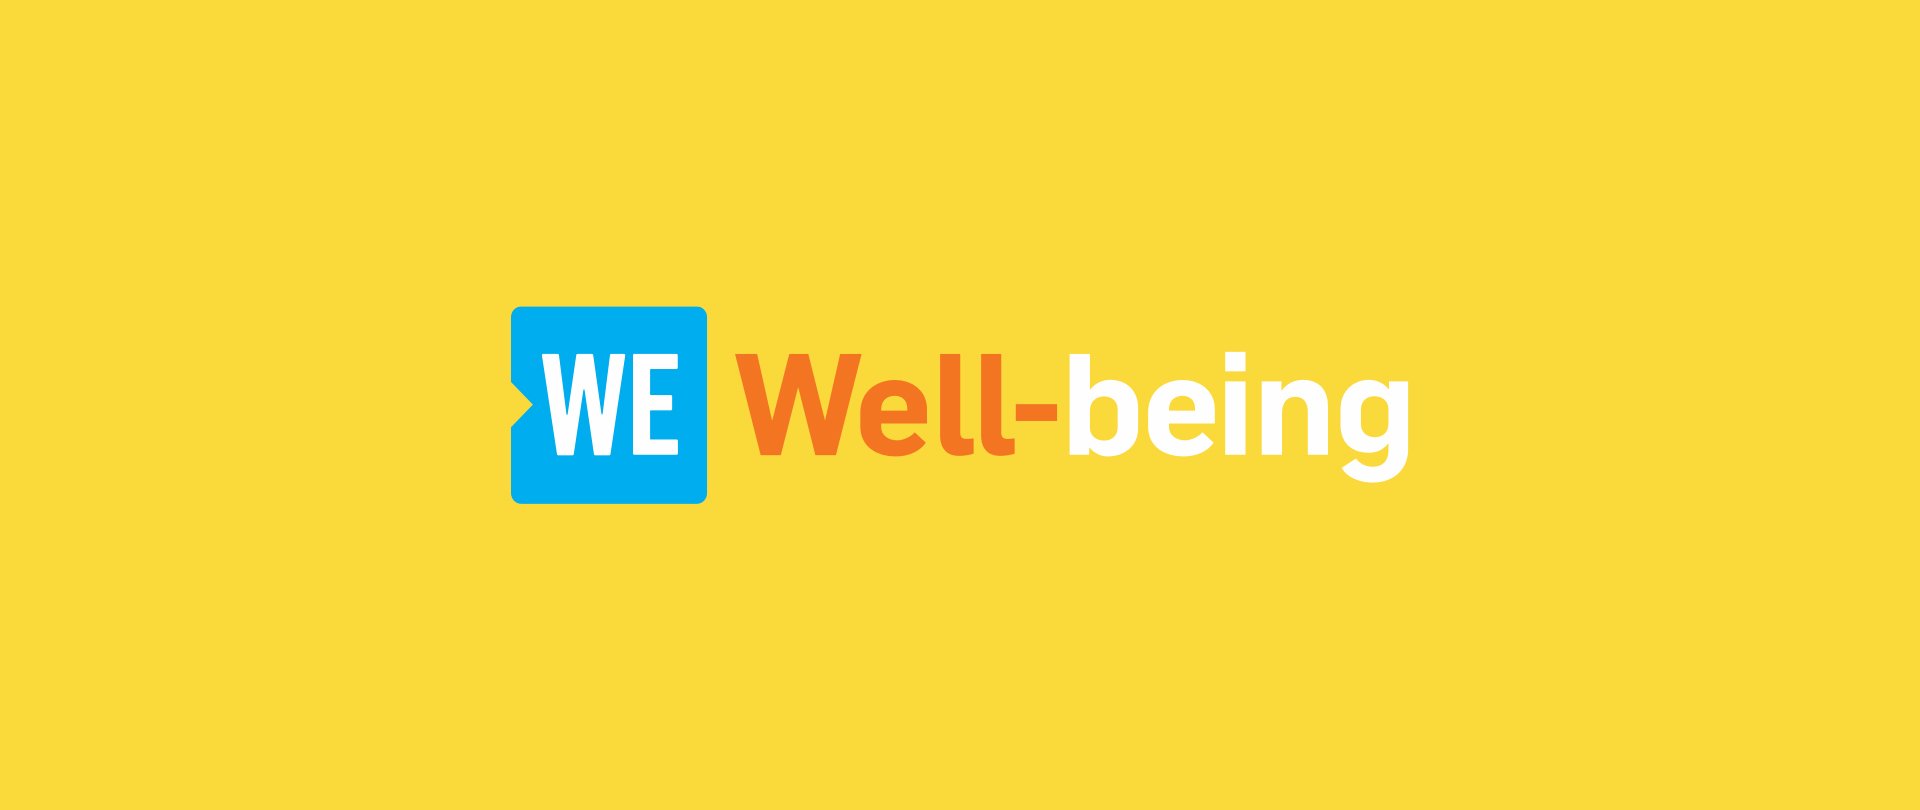 SCP Hotel donates to WE Well-being